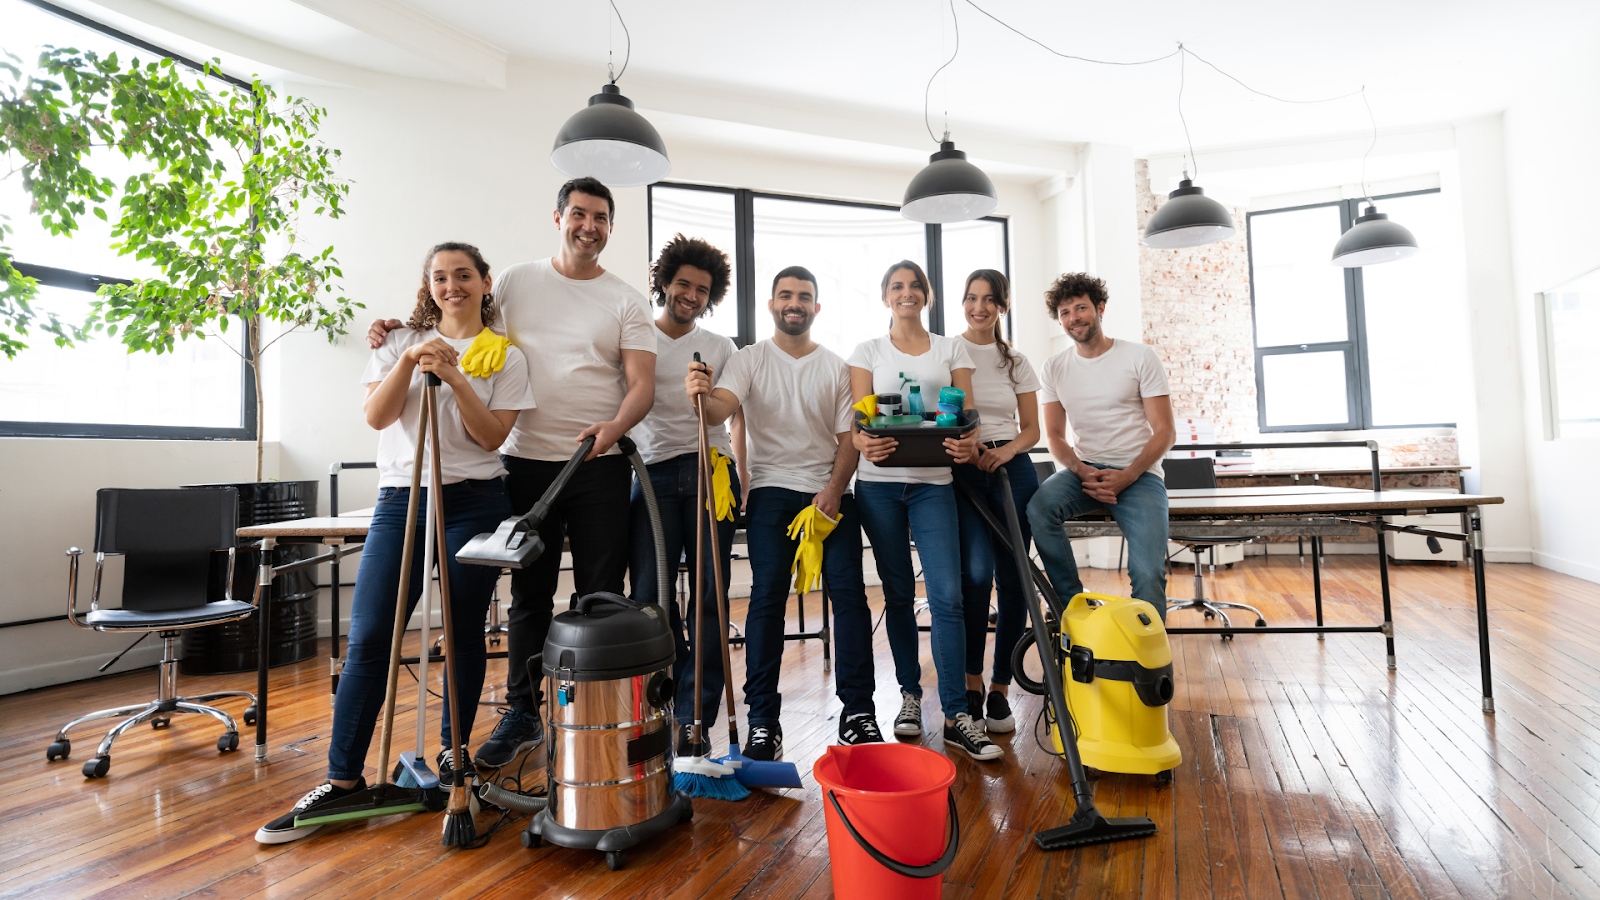 outsource cleaning services to decrease turnover rate